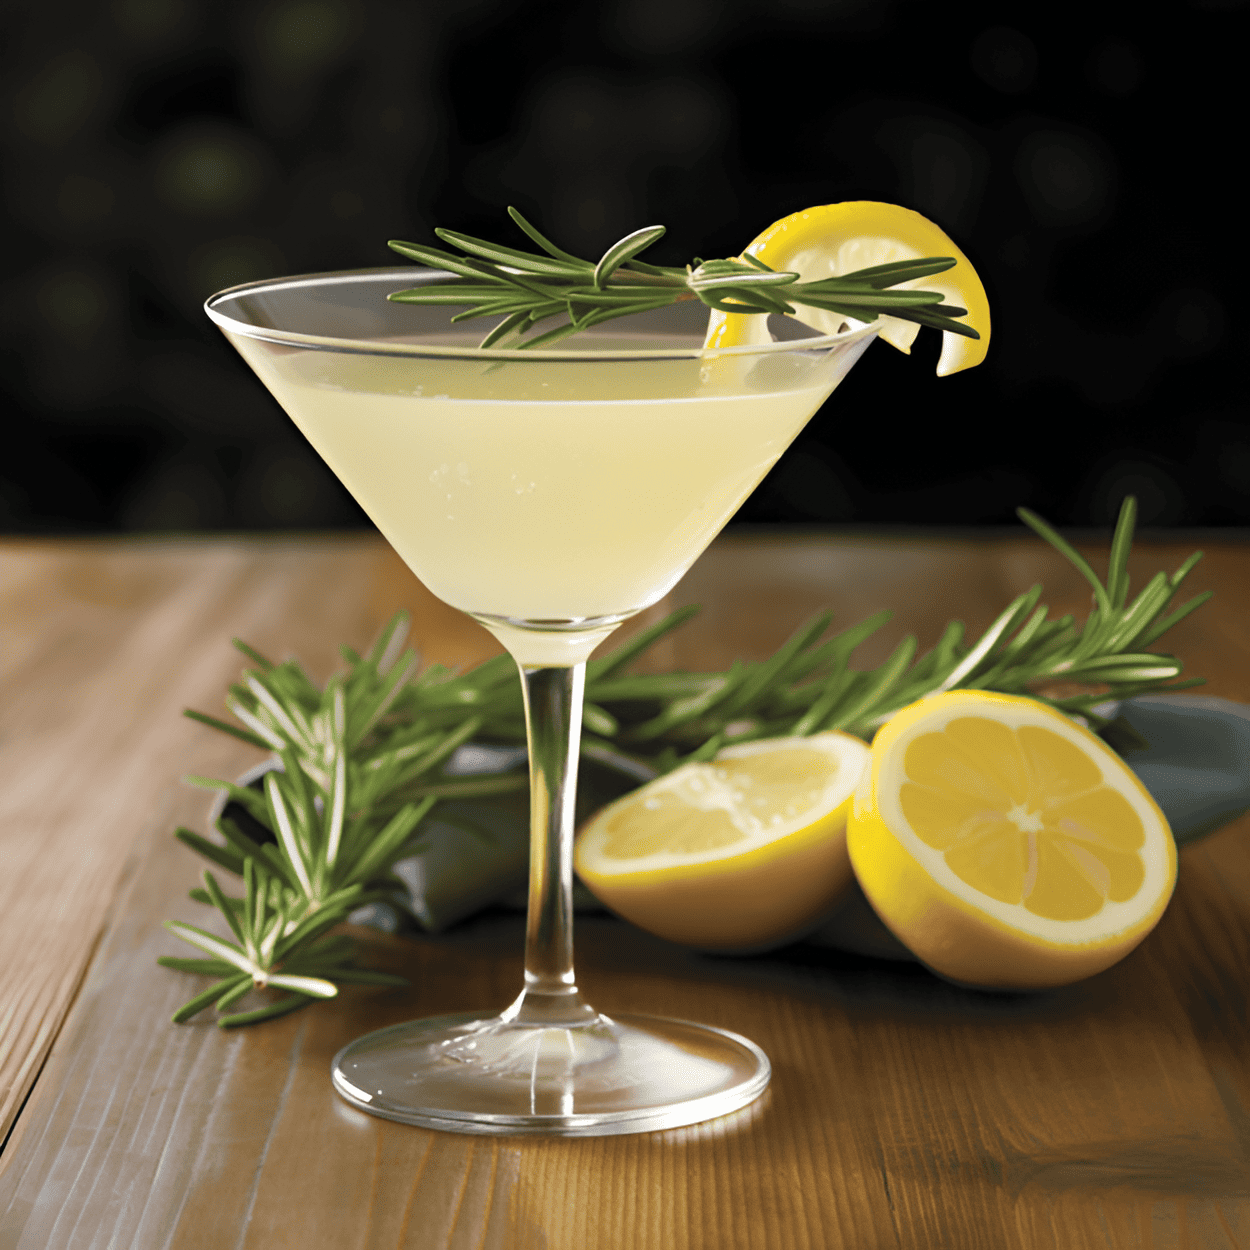 Rosemary Lemon Martini Cocktail Recipe - The Rosemary Lemon Martini is a delightful blend of sweet, sour, and herbal flavors. The tartness of the lemon is balanced by the subtle sweetness of the simple syrup, while the rosemary adds a refreshing, earthy undertone. The gin base provides a strong, smooth backbone, making this a well-rounded, sophisticated cocktail.